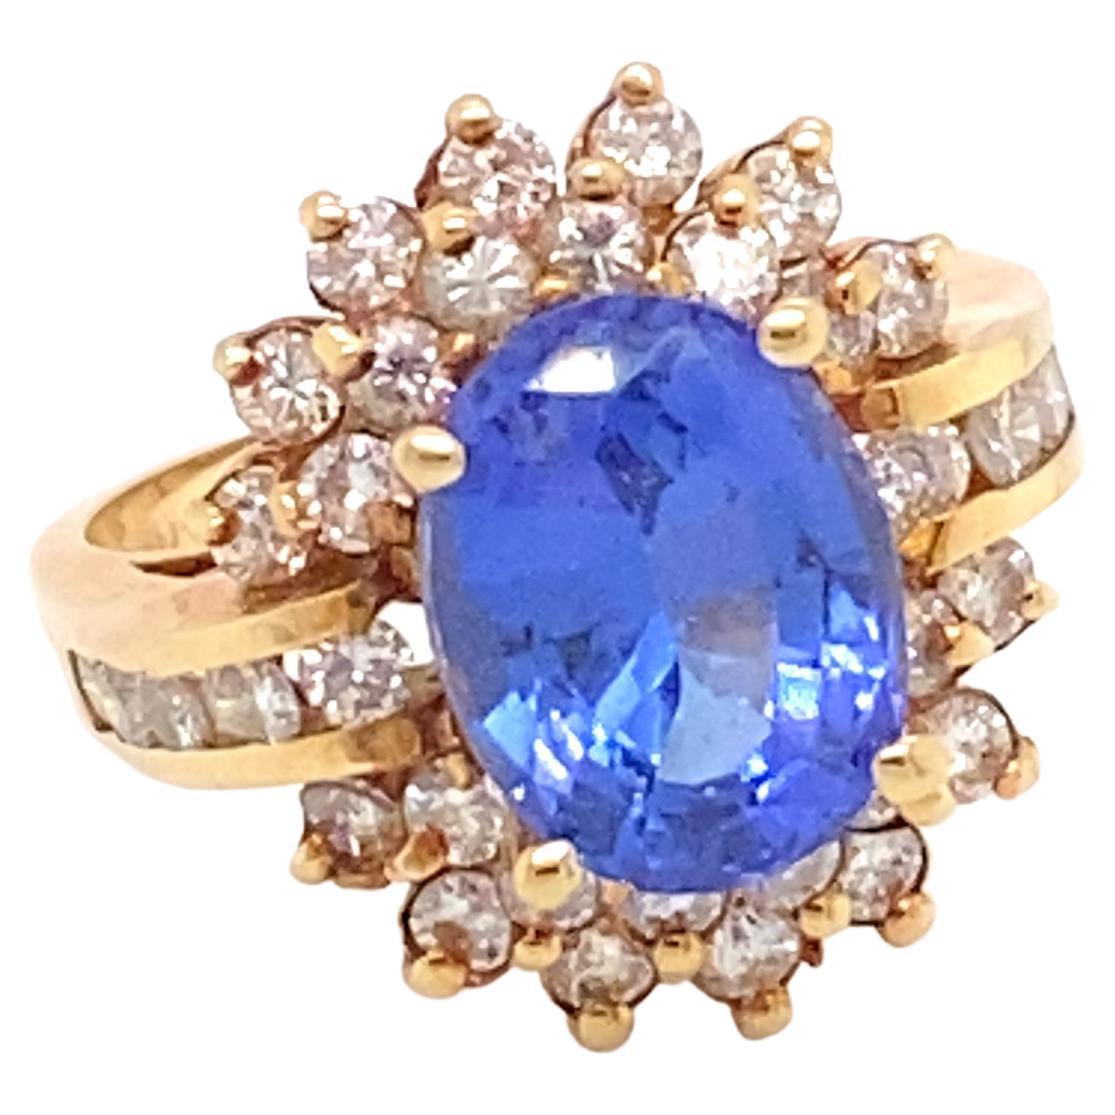 2.0 Carat Oval Sapphire and 0.50 Carat Diamond Ring in 14 Karat Gold For Sale